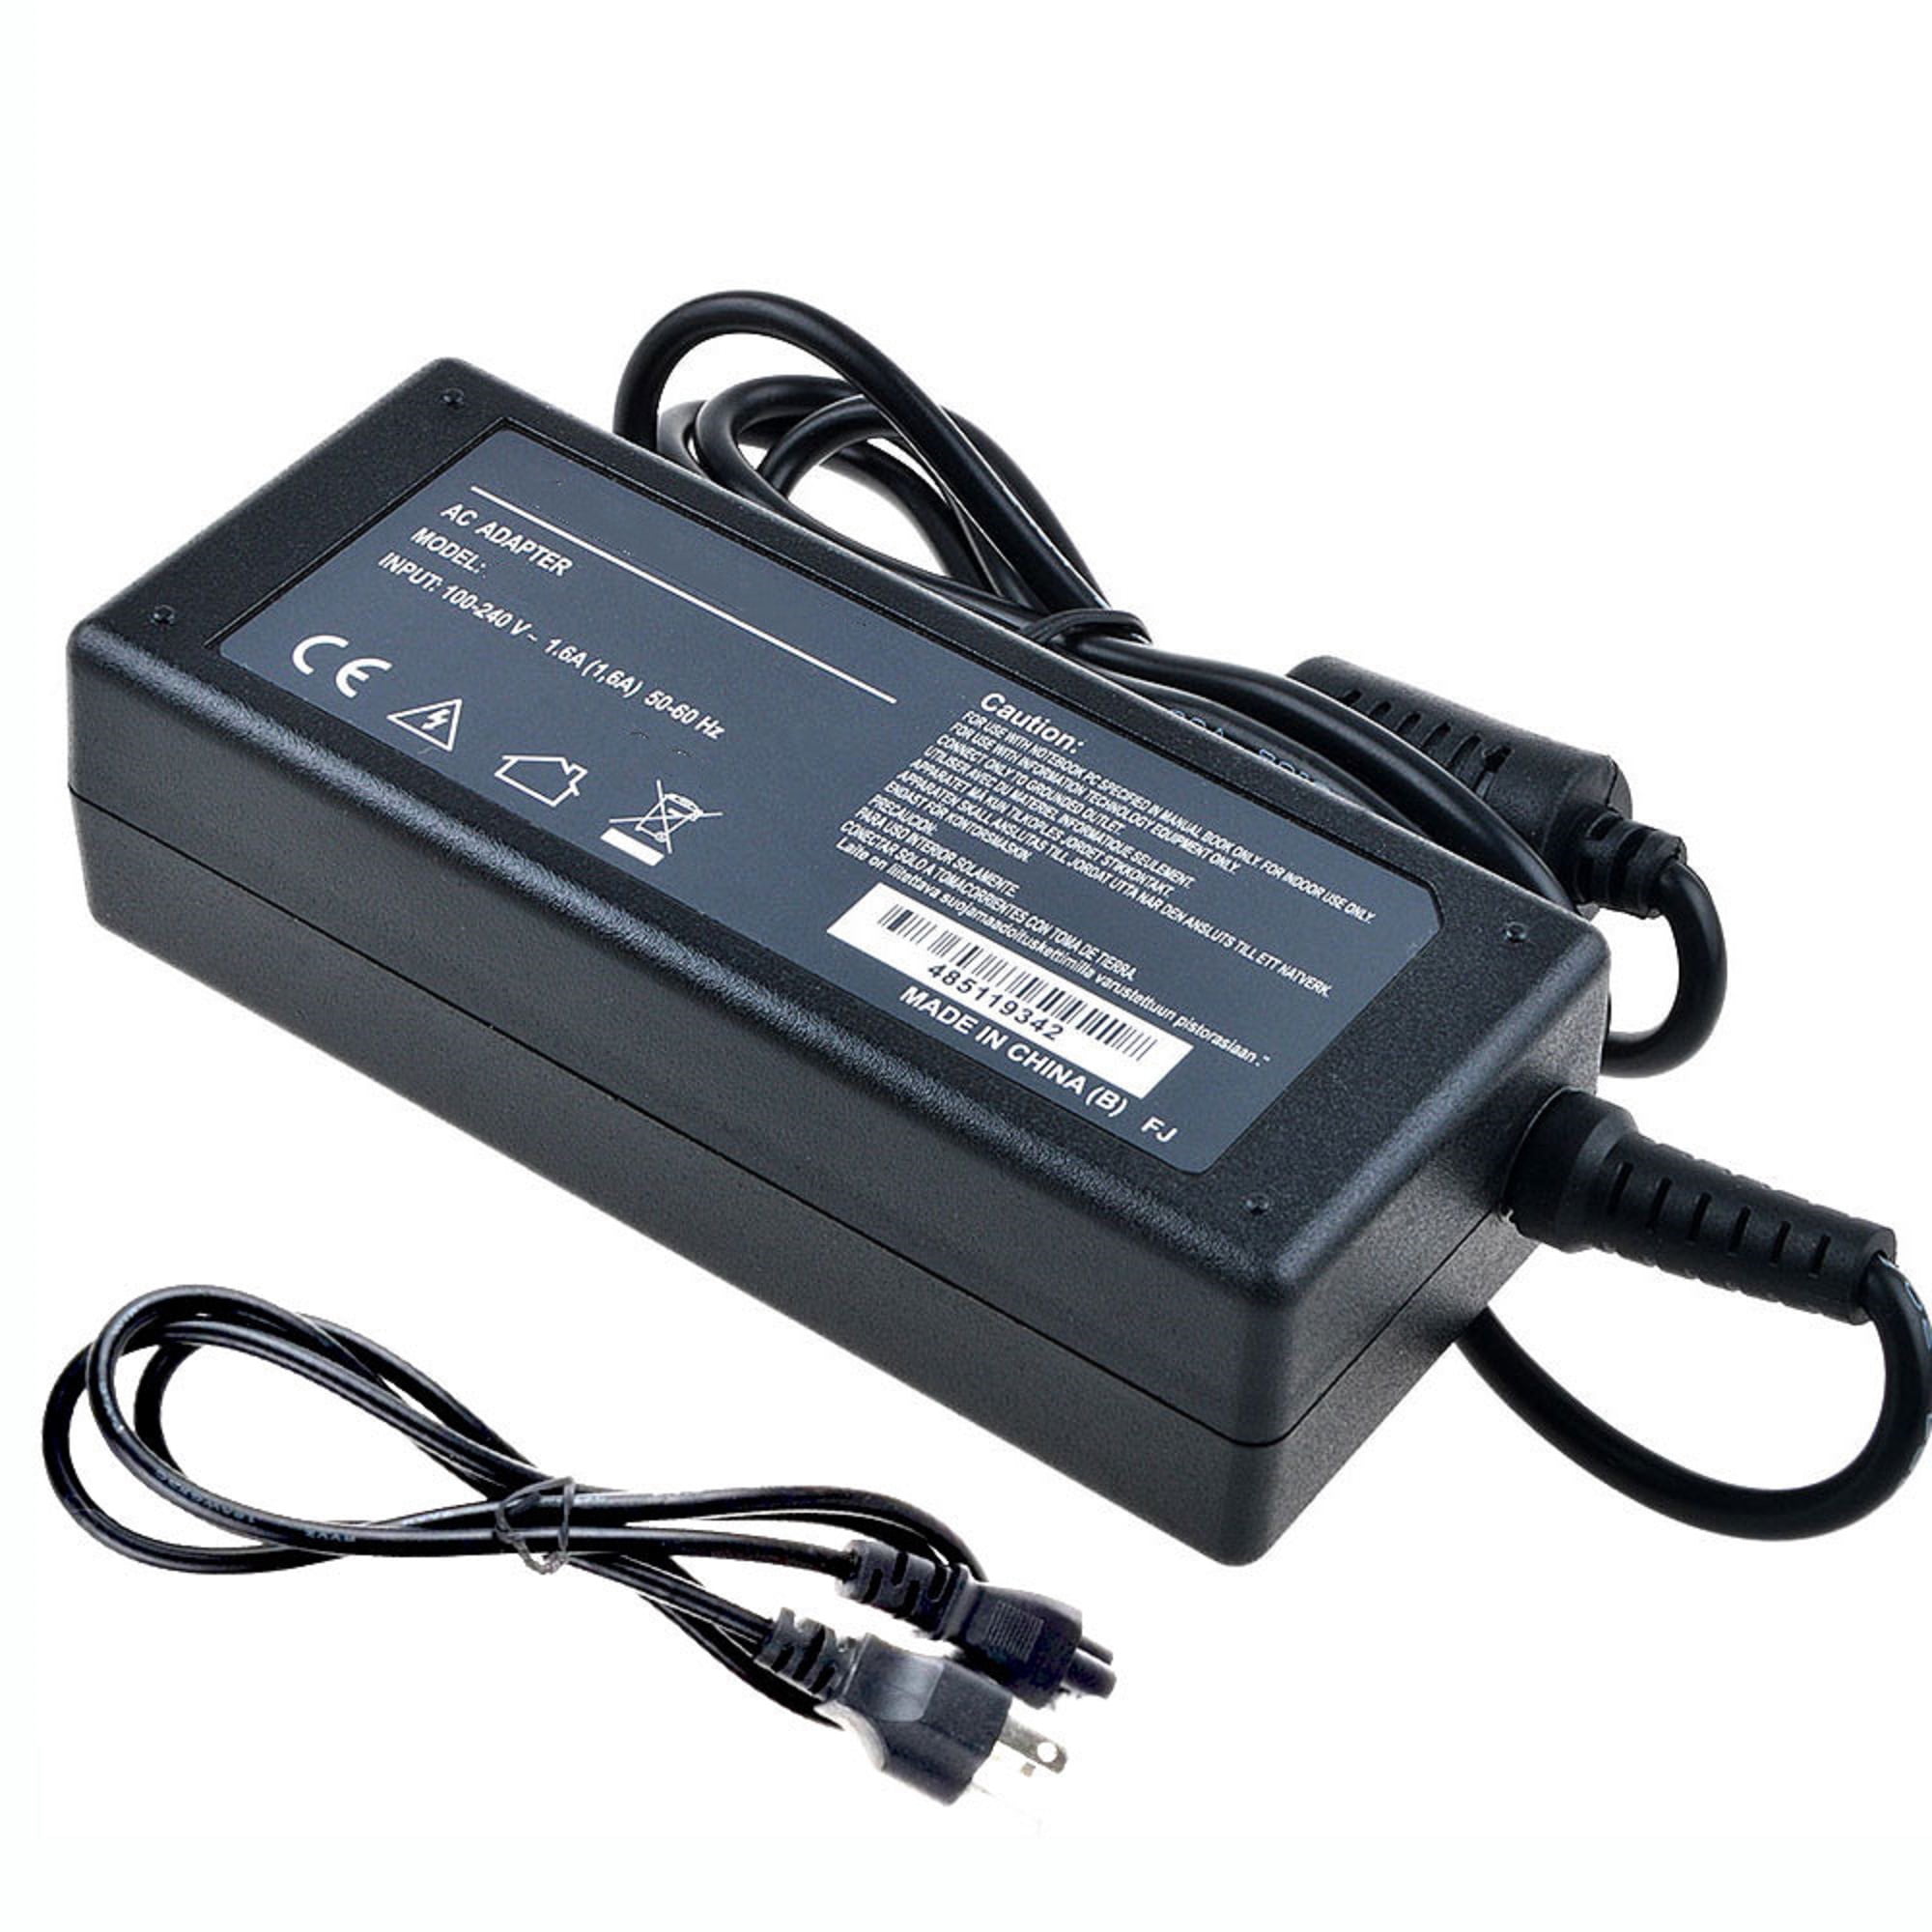 AC Adapter For Vaddio ProductionVIEW FX Camera Control Console Power Supply Cord 